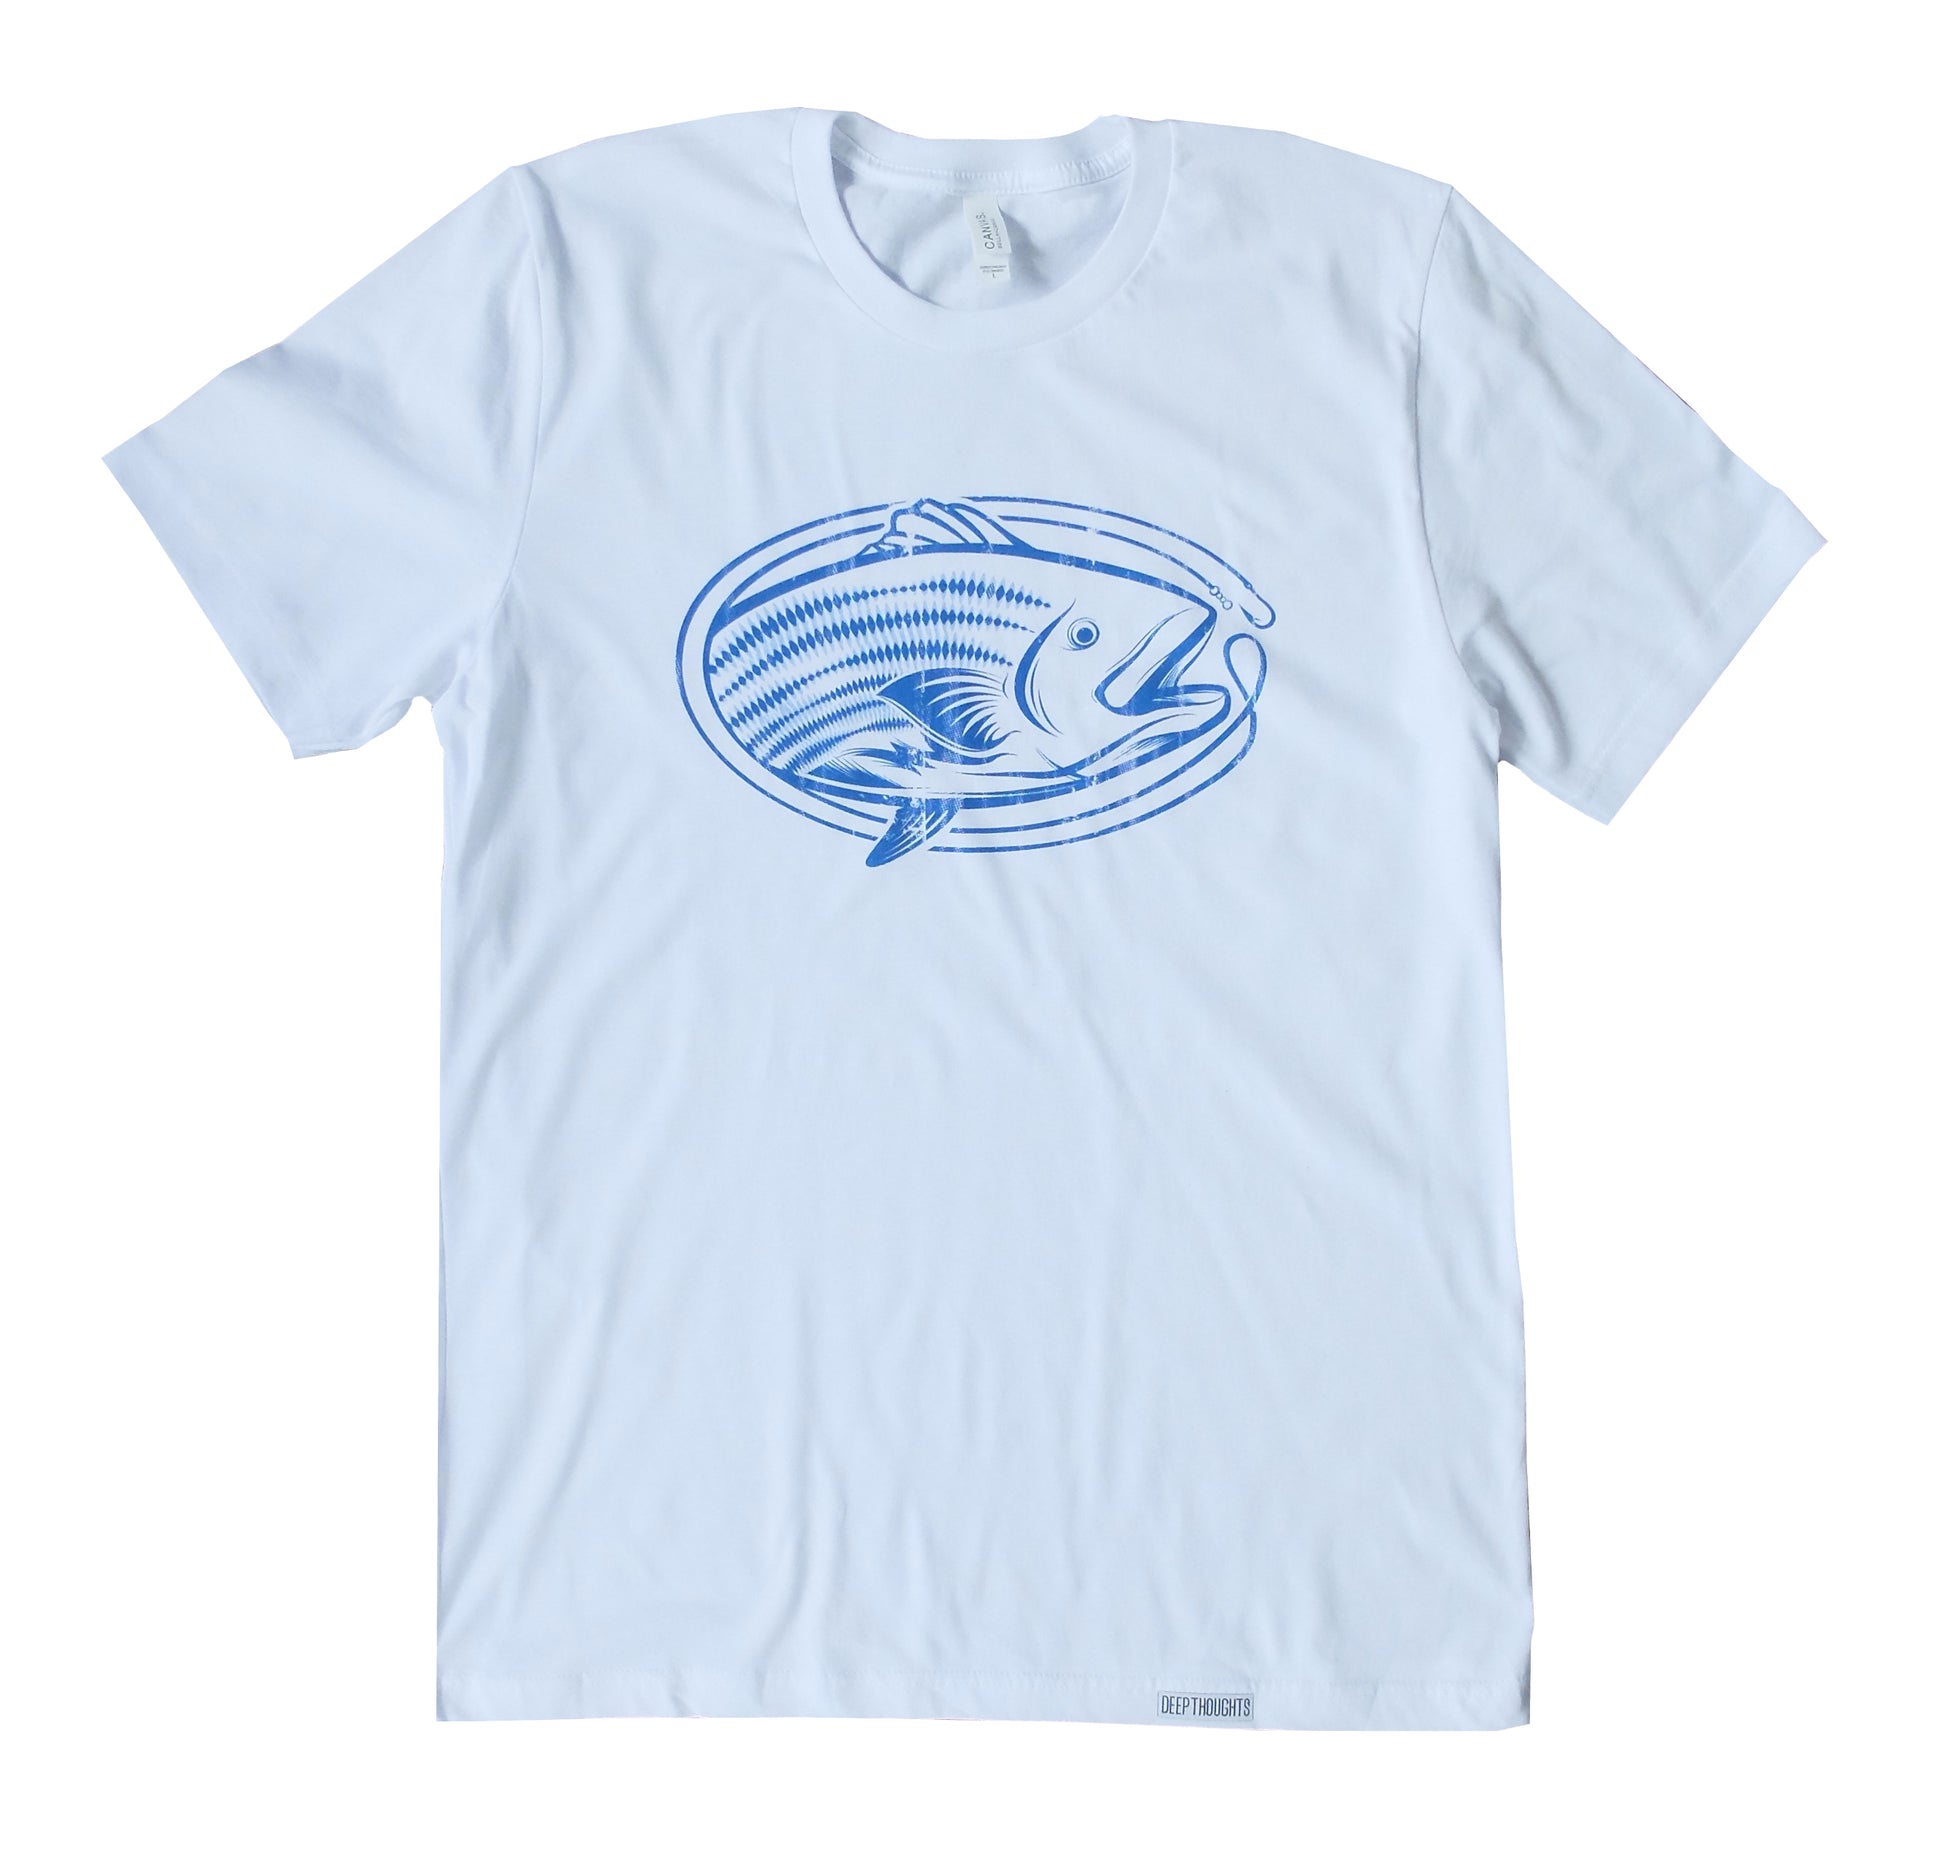 white cotton t-shirt with blue oval shaped striped bass fishing graphic